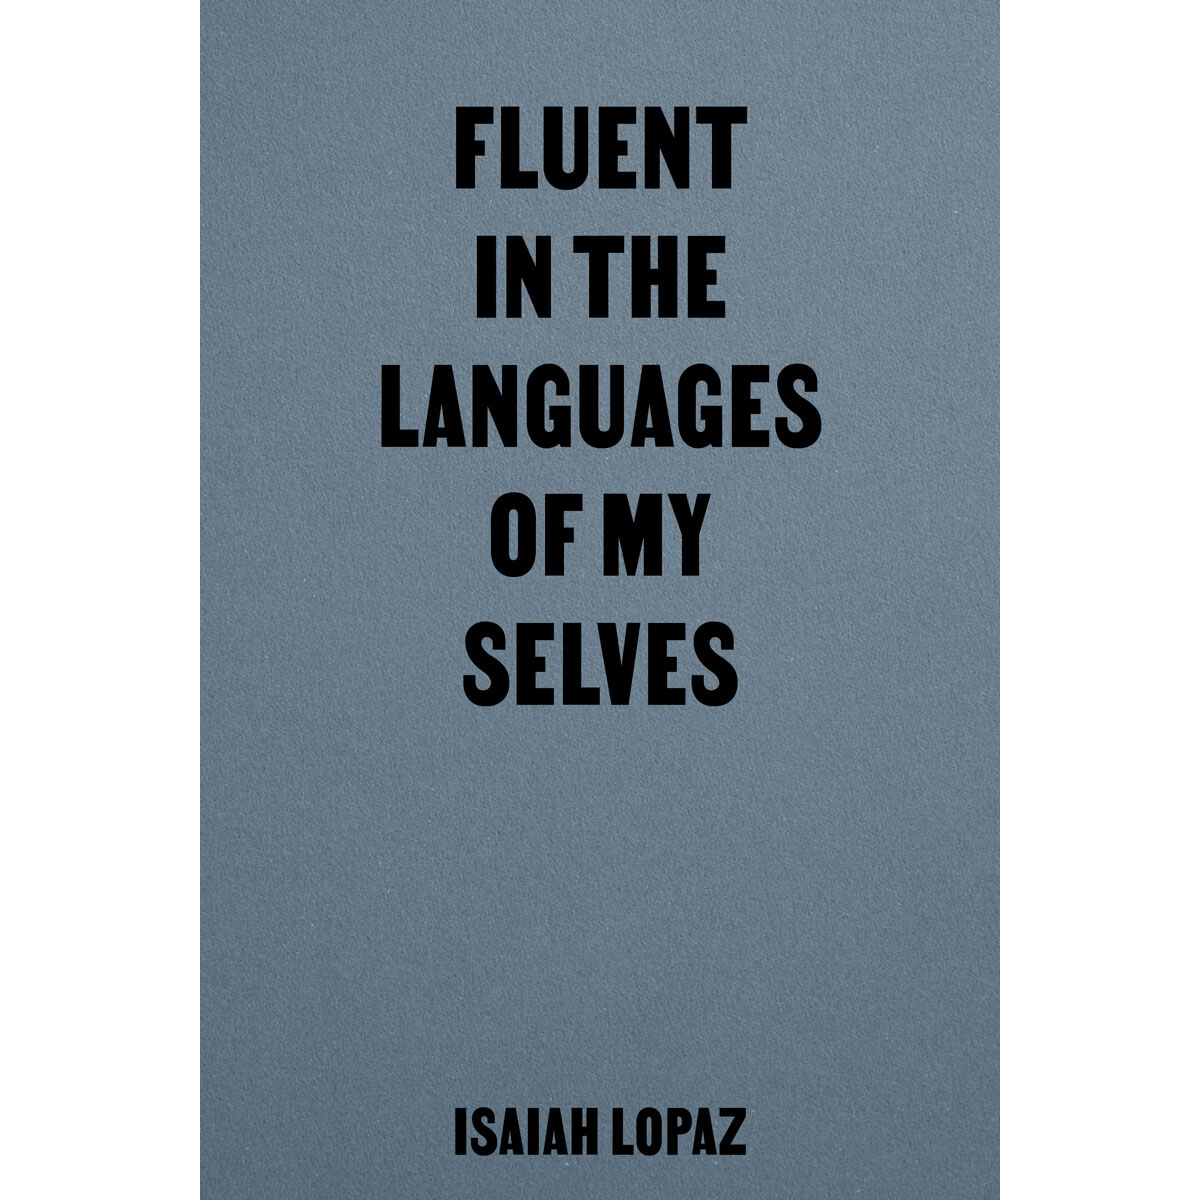 Fluent in the Languages of my Selves by Isaiah Lopaz